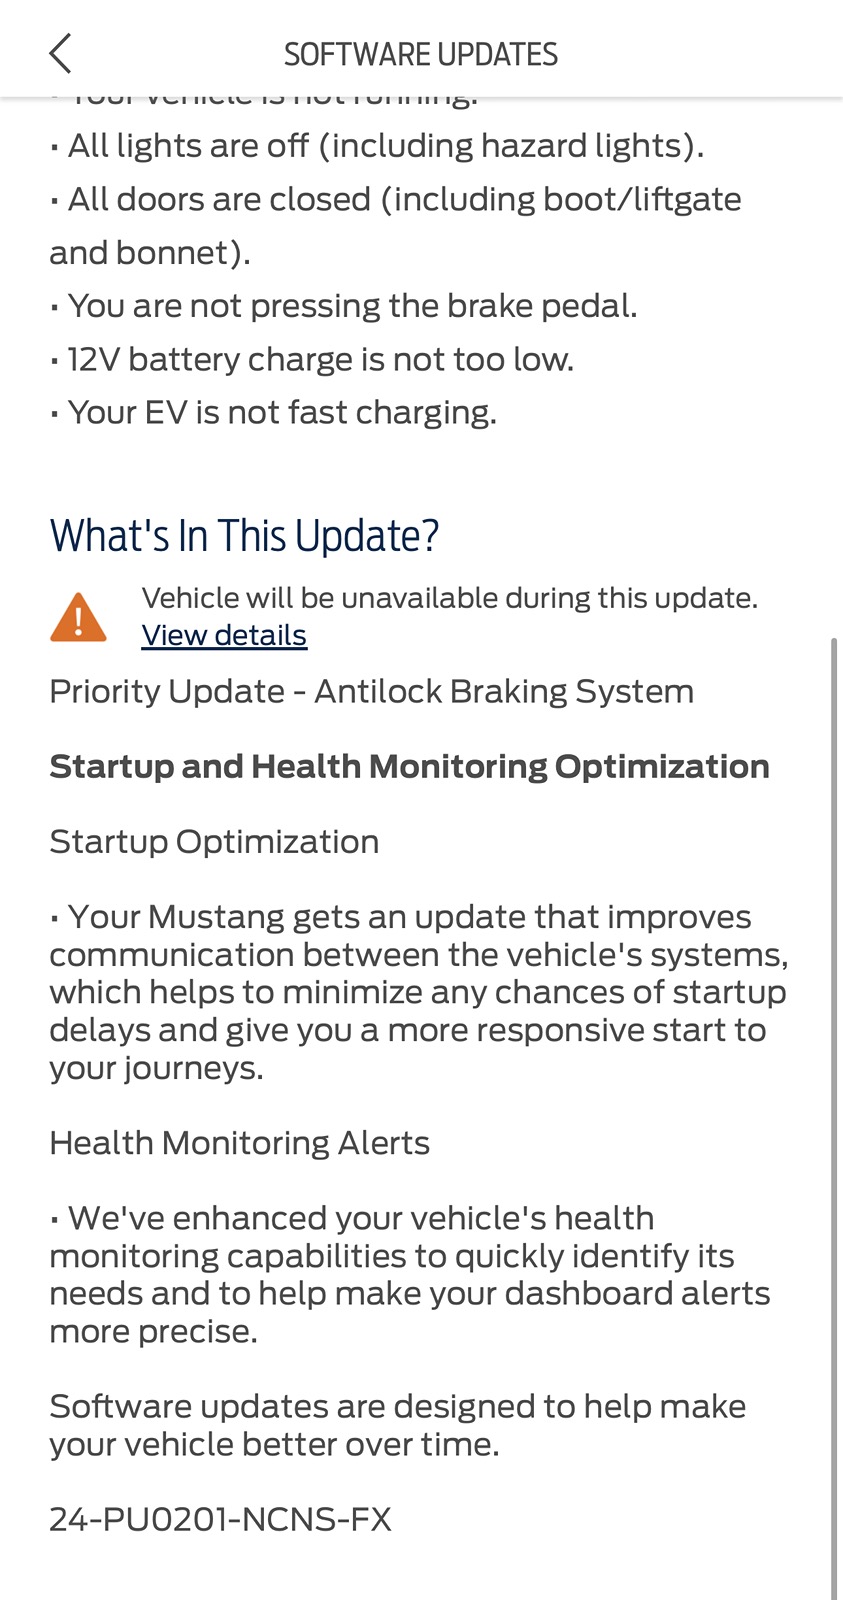 S650 Mustang First OTA software update IMG_8799